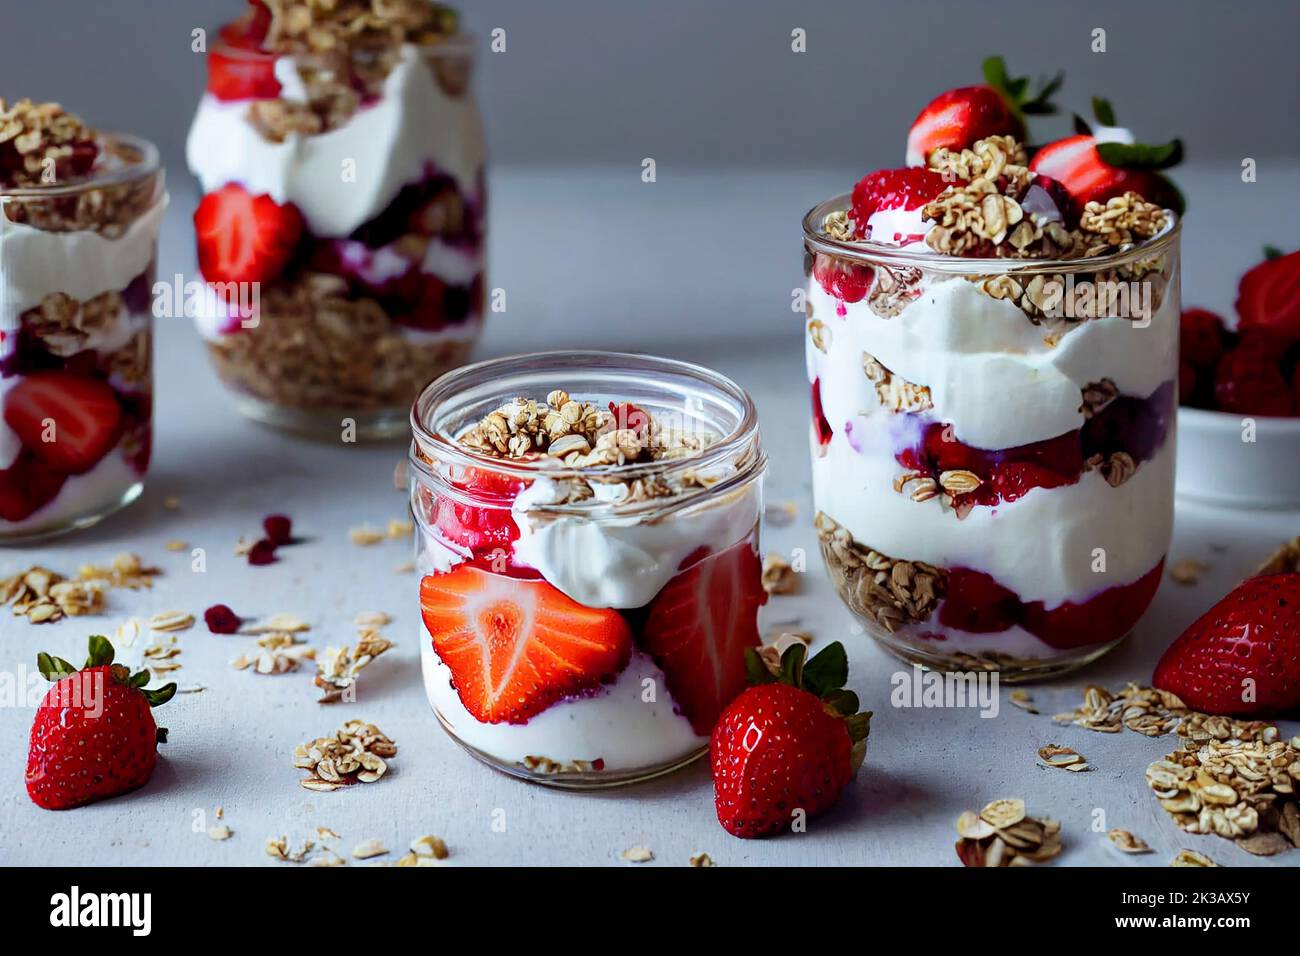 Healthy breakfast of strawberry parfaits made with fresh fruit, yogurt and granola on a white table, food photography and illustration Stock Photo